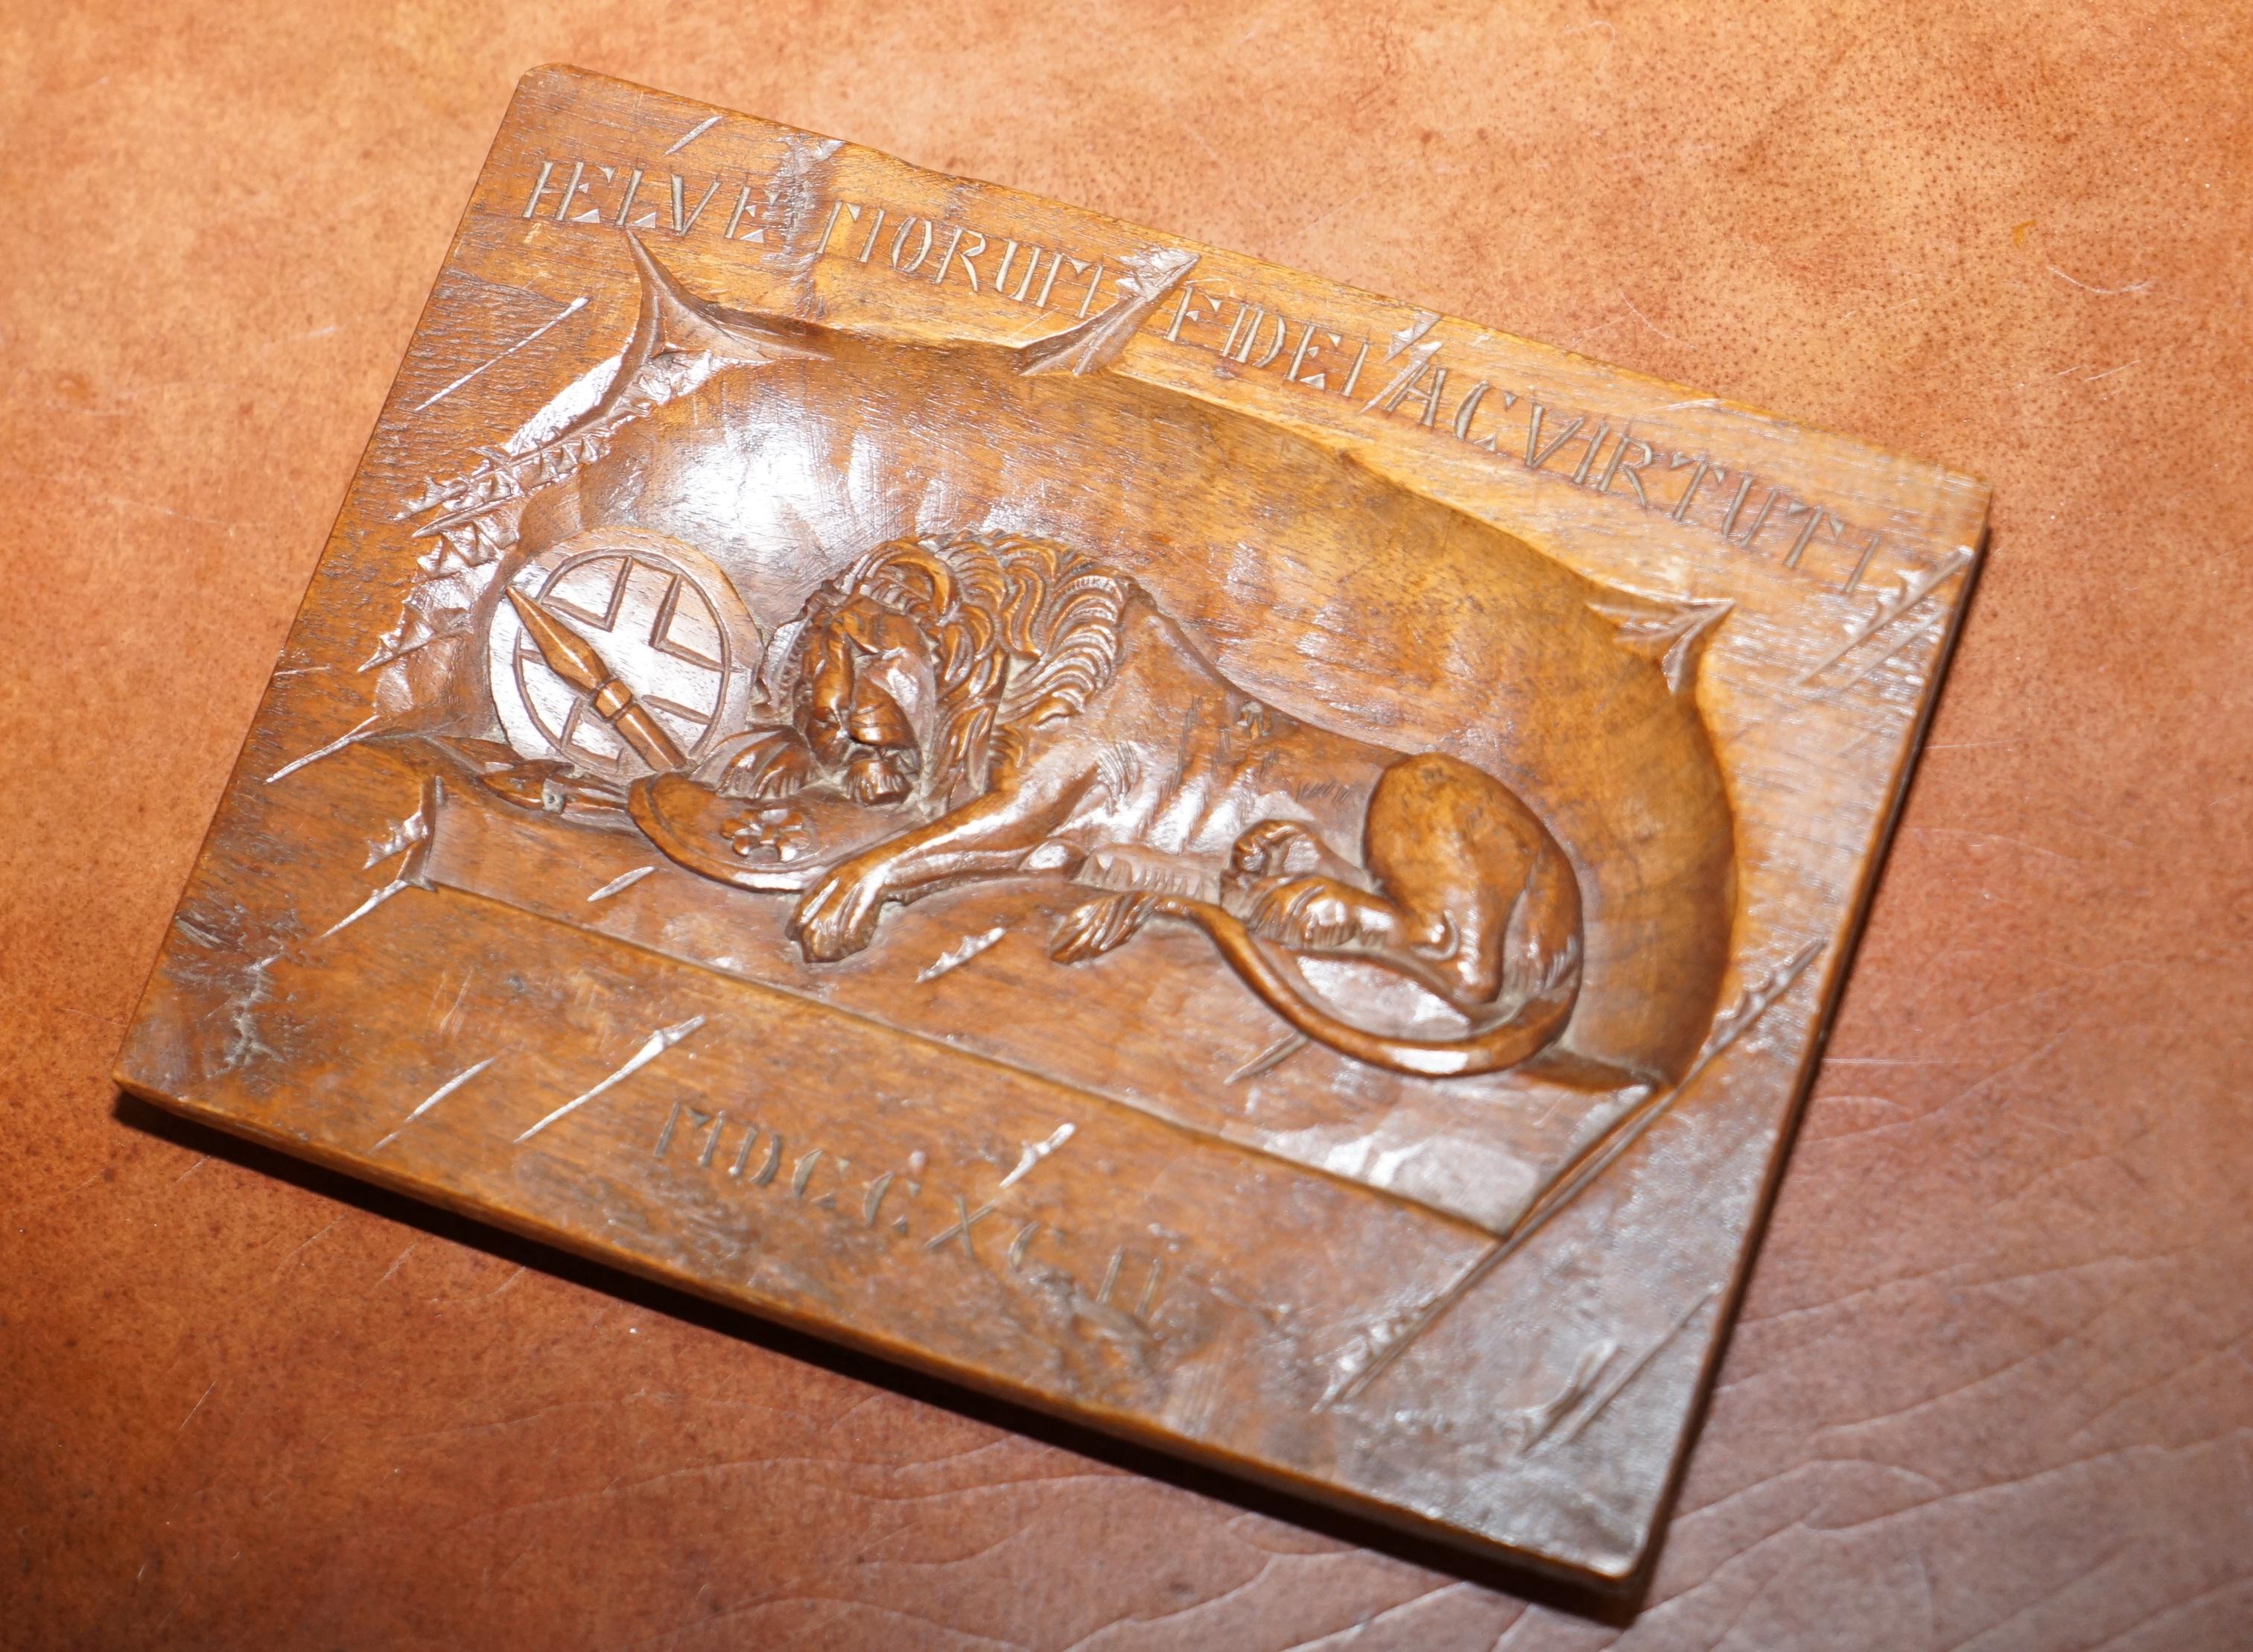 We are delighted to offer for sale this lovely hand carved wall plaque of The Lion of Lucerne and documentation

A very good looking and well made piece, it comes complete with some newspaper cuttings explaining what this is 

This plaque is a